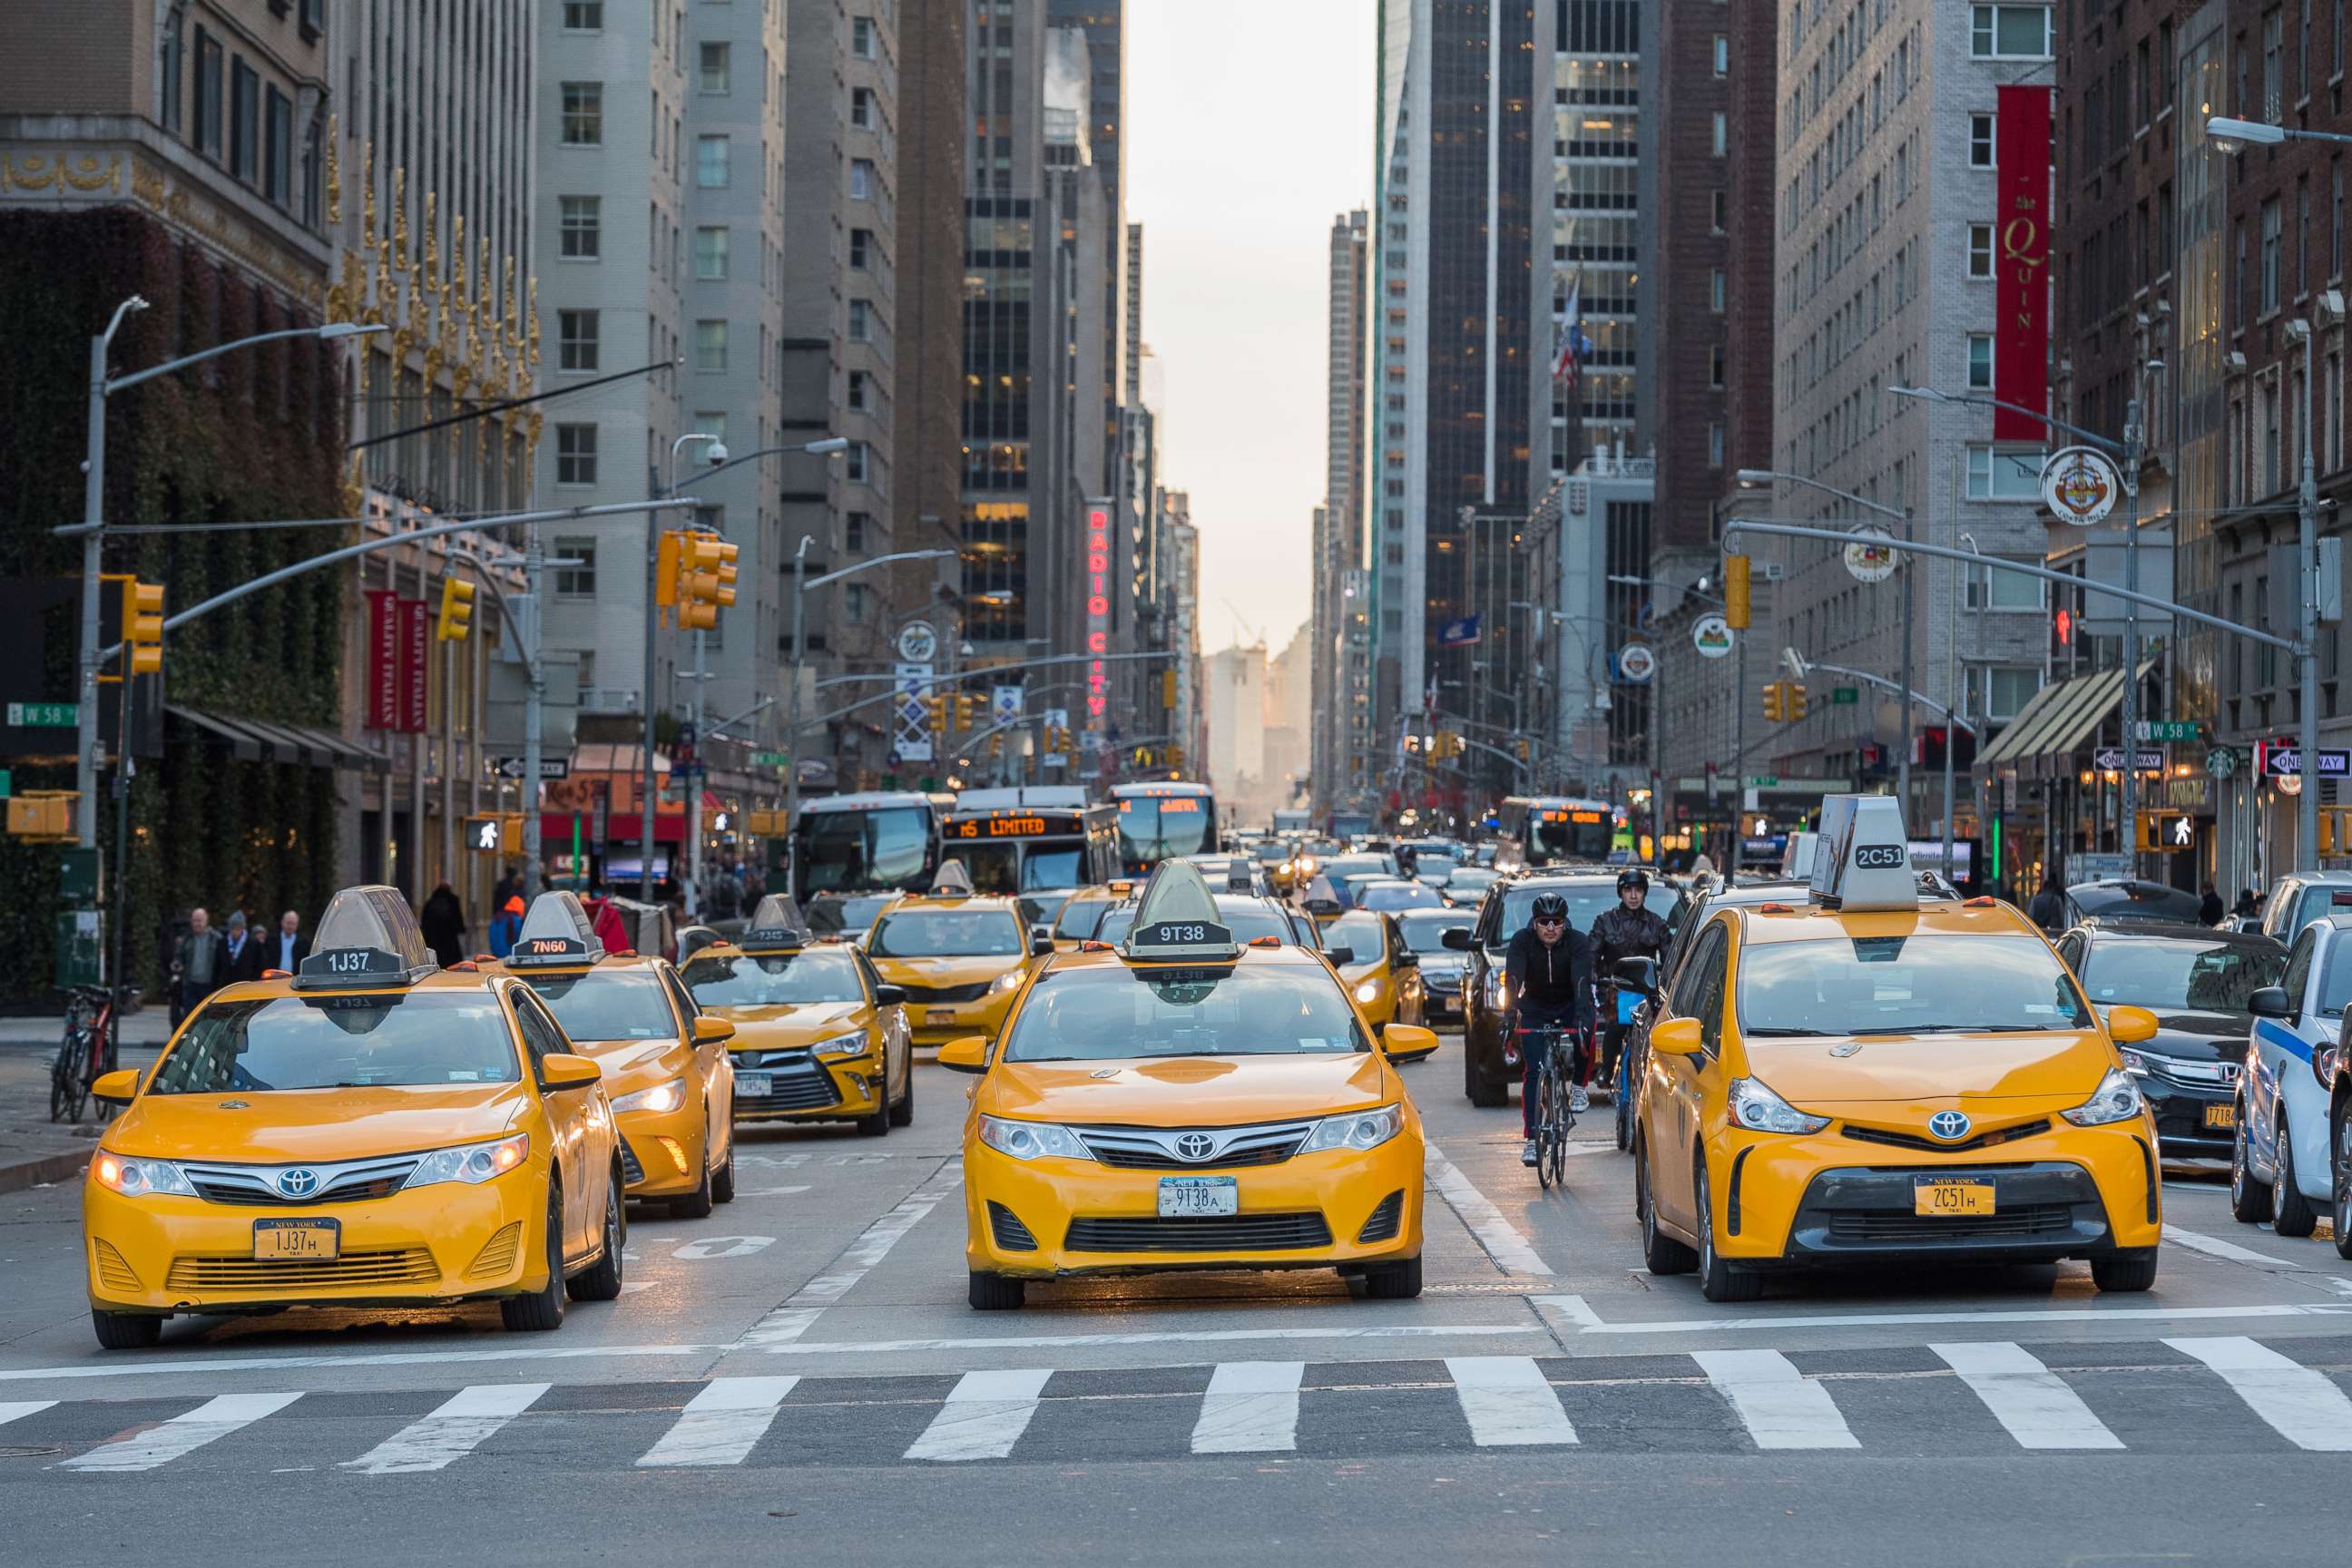 PHOTO: Taxi's lined up at an intersection on Feb. 27th 2017, in New York City.